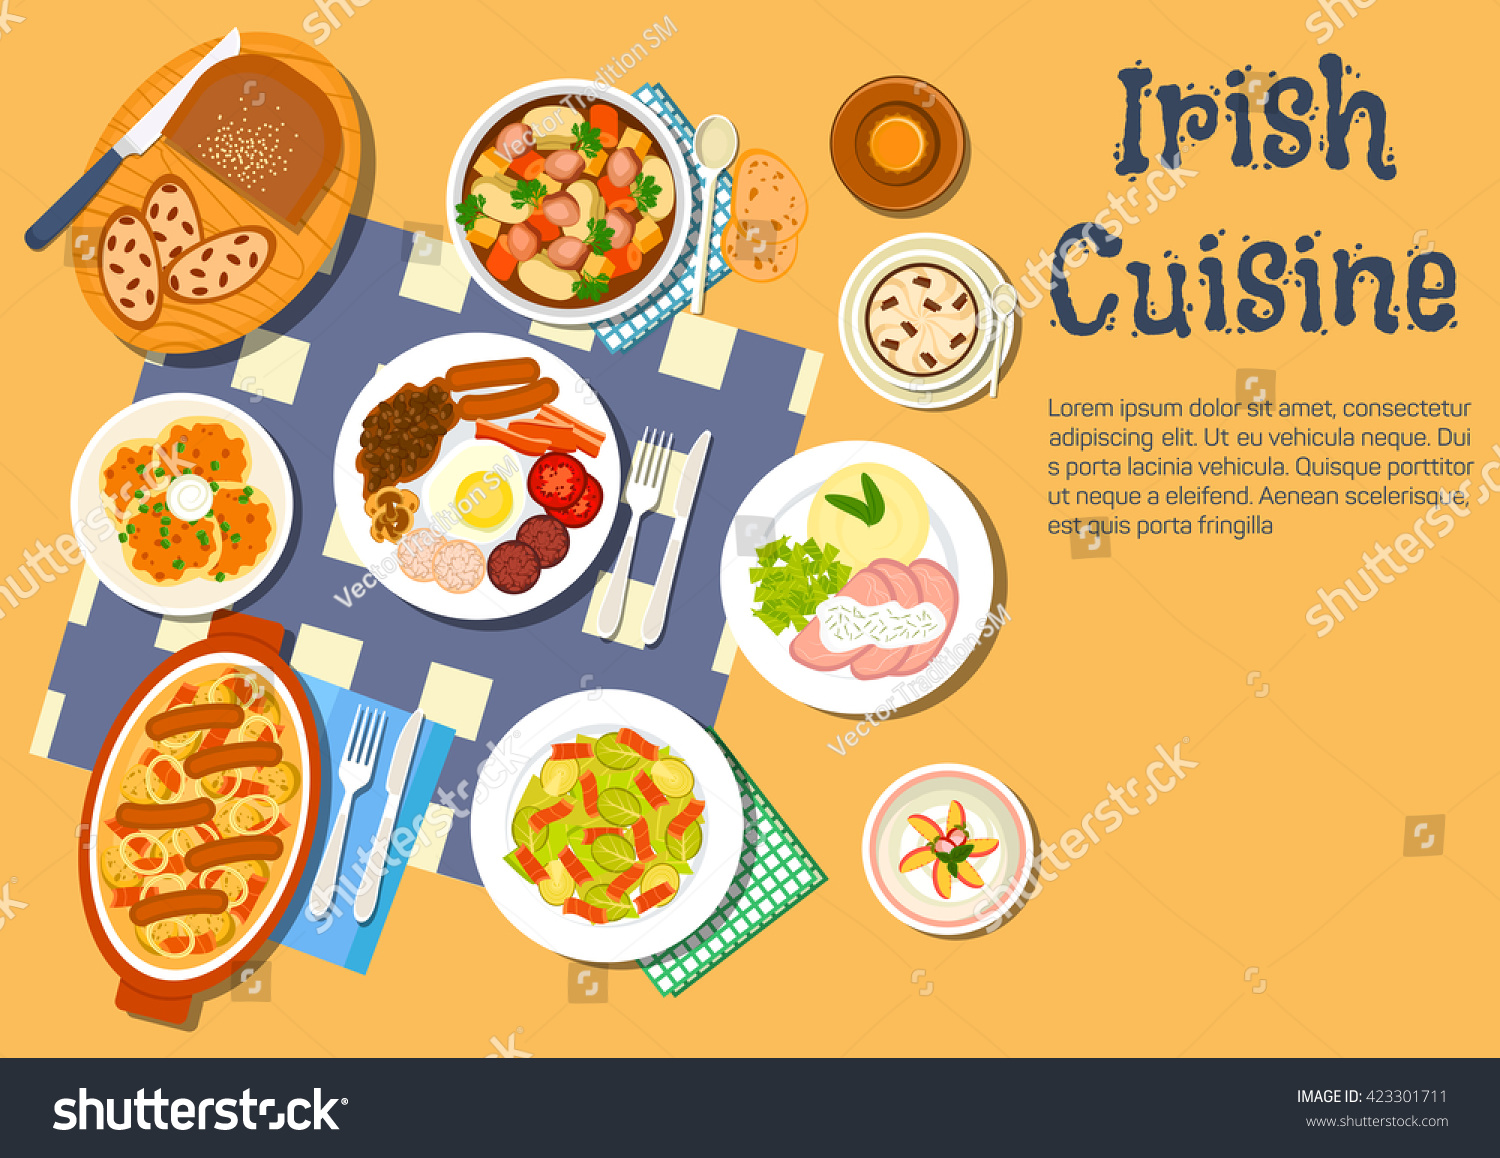 SVG of Irish cuisine with potato pancakes boxty and stew coddle, breakfast with beer, brussels sprouts bacon salad and beef with mashed potato, lamb stew and coffee with raisin bread and strawberry dessert svg